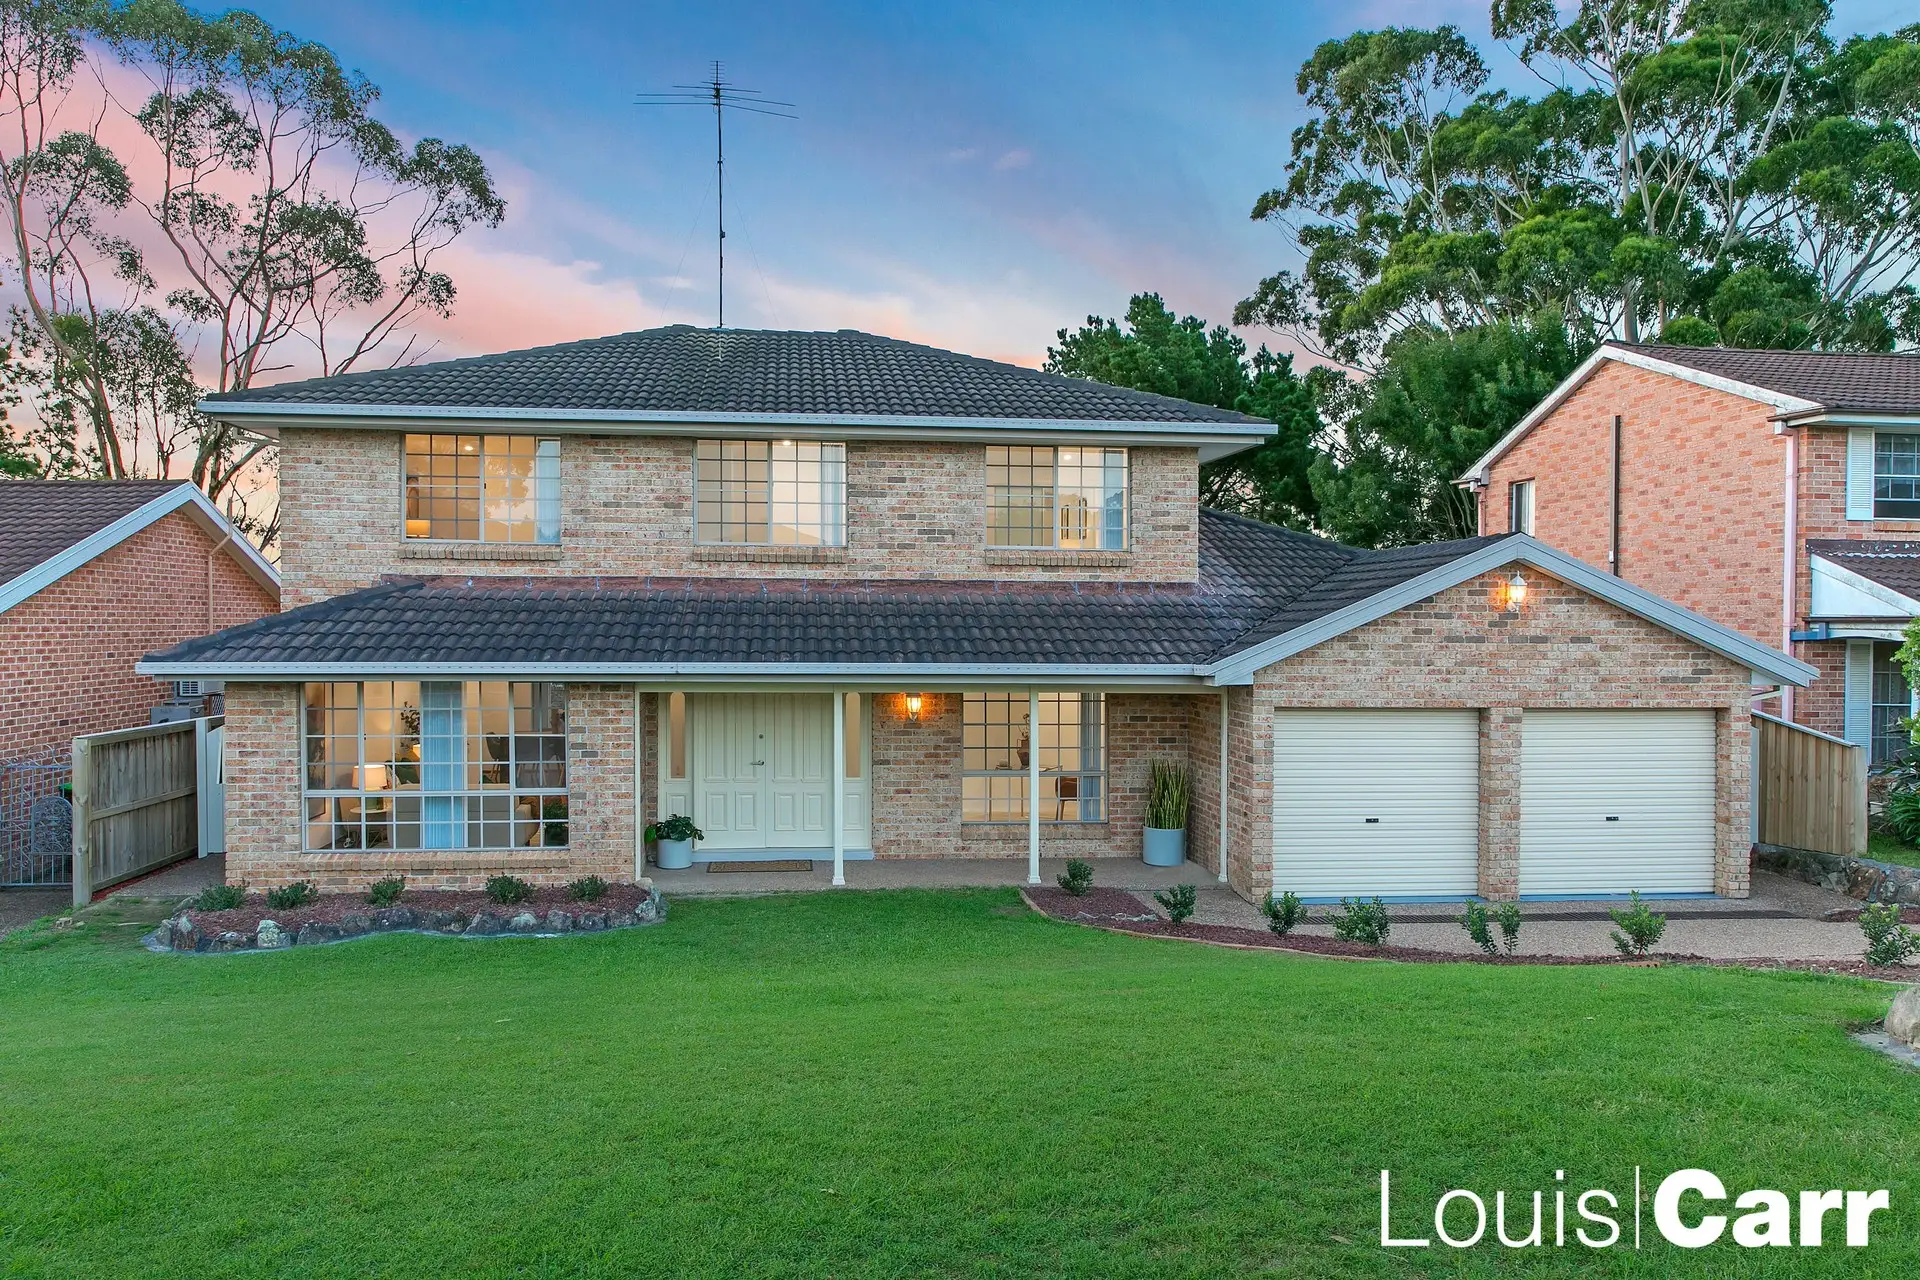 Photo #1: 189 Purchase Road, Cherrybrook - Sold by Louis Carr Real Estate